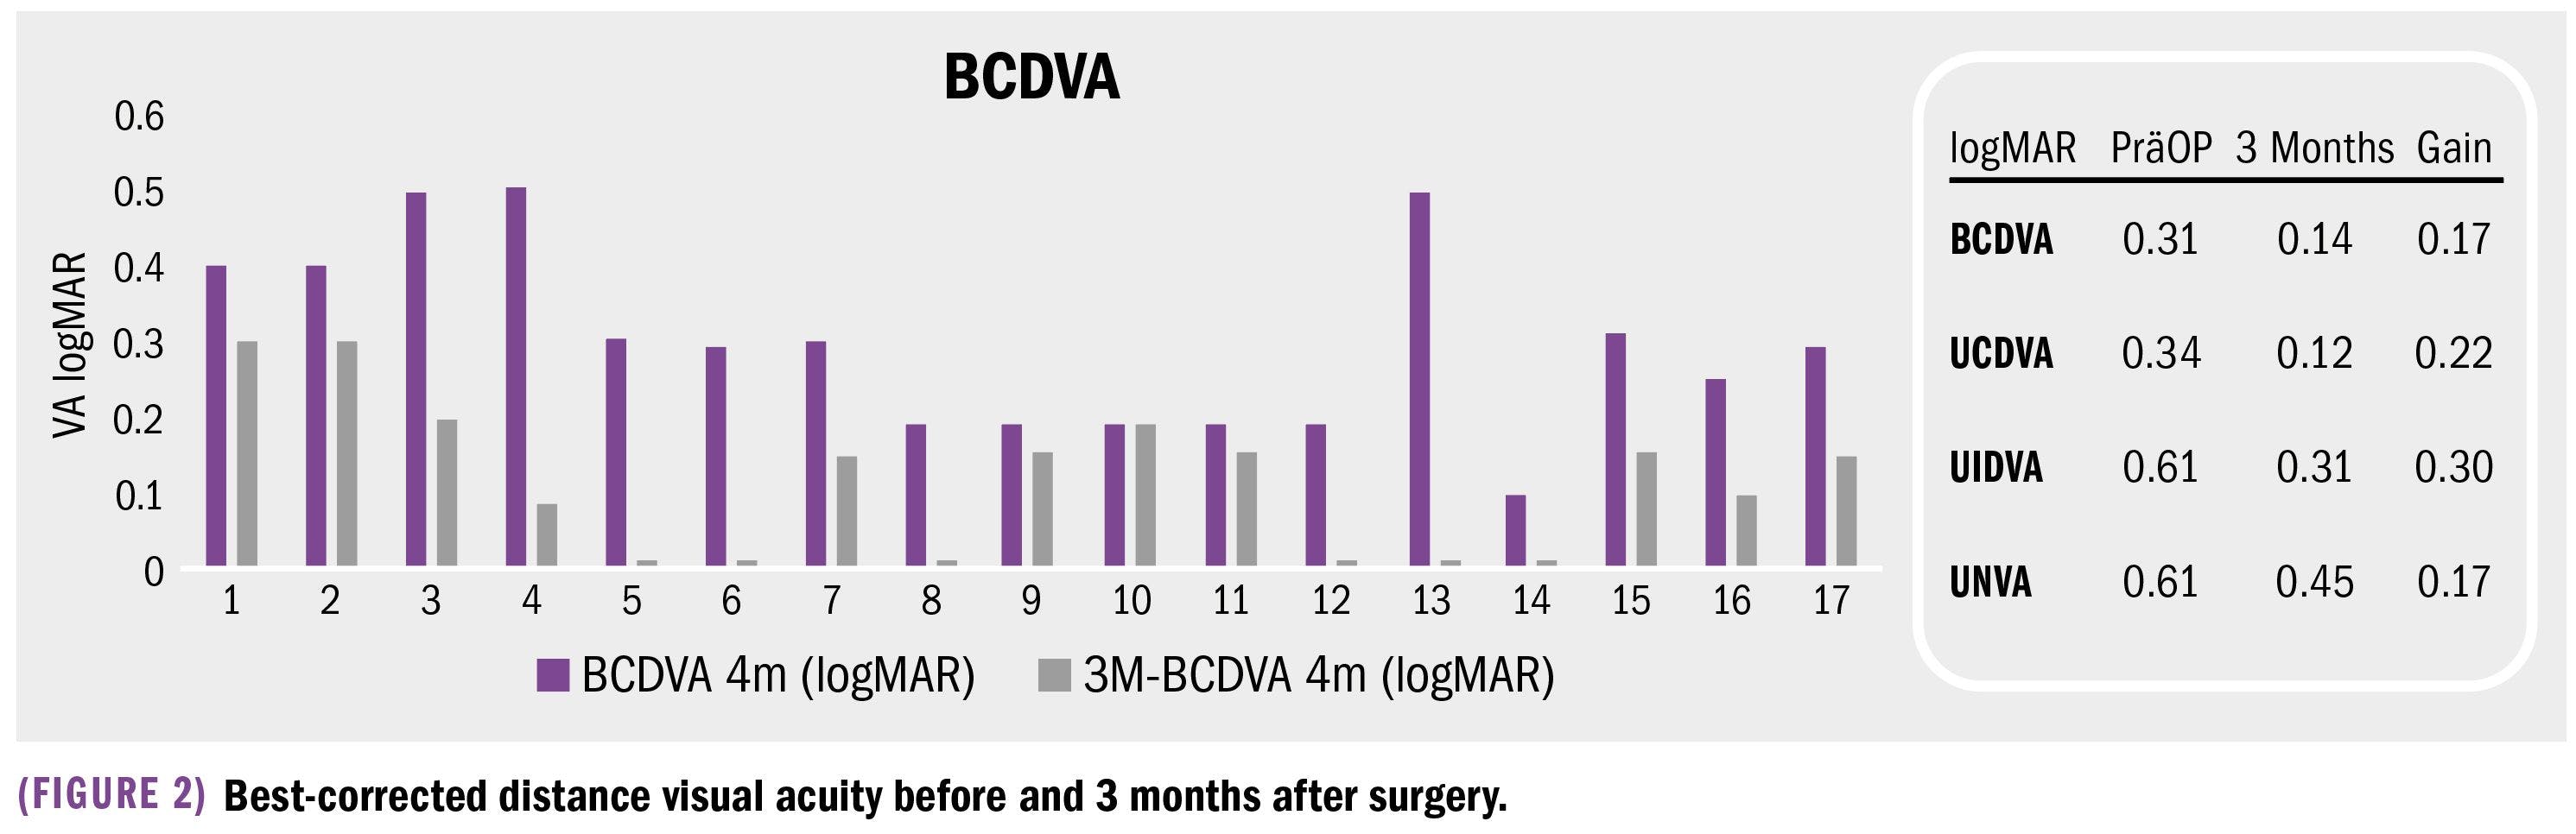 chart of best-corrected visual acuity before and 3 months after surgery